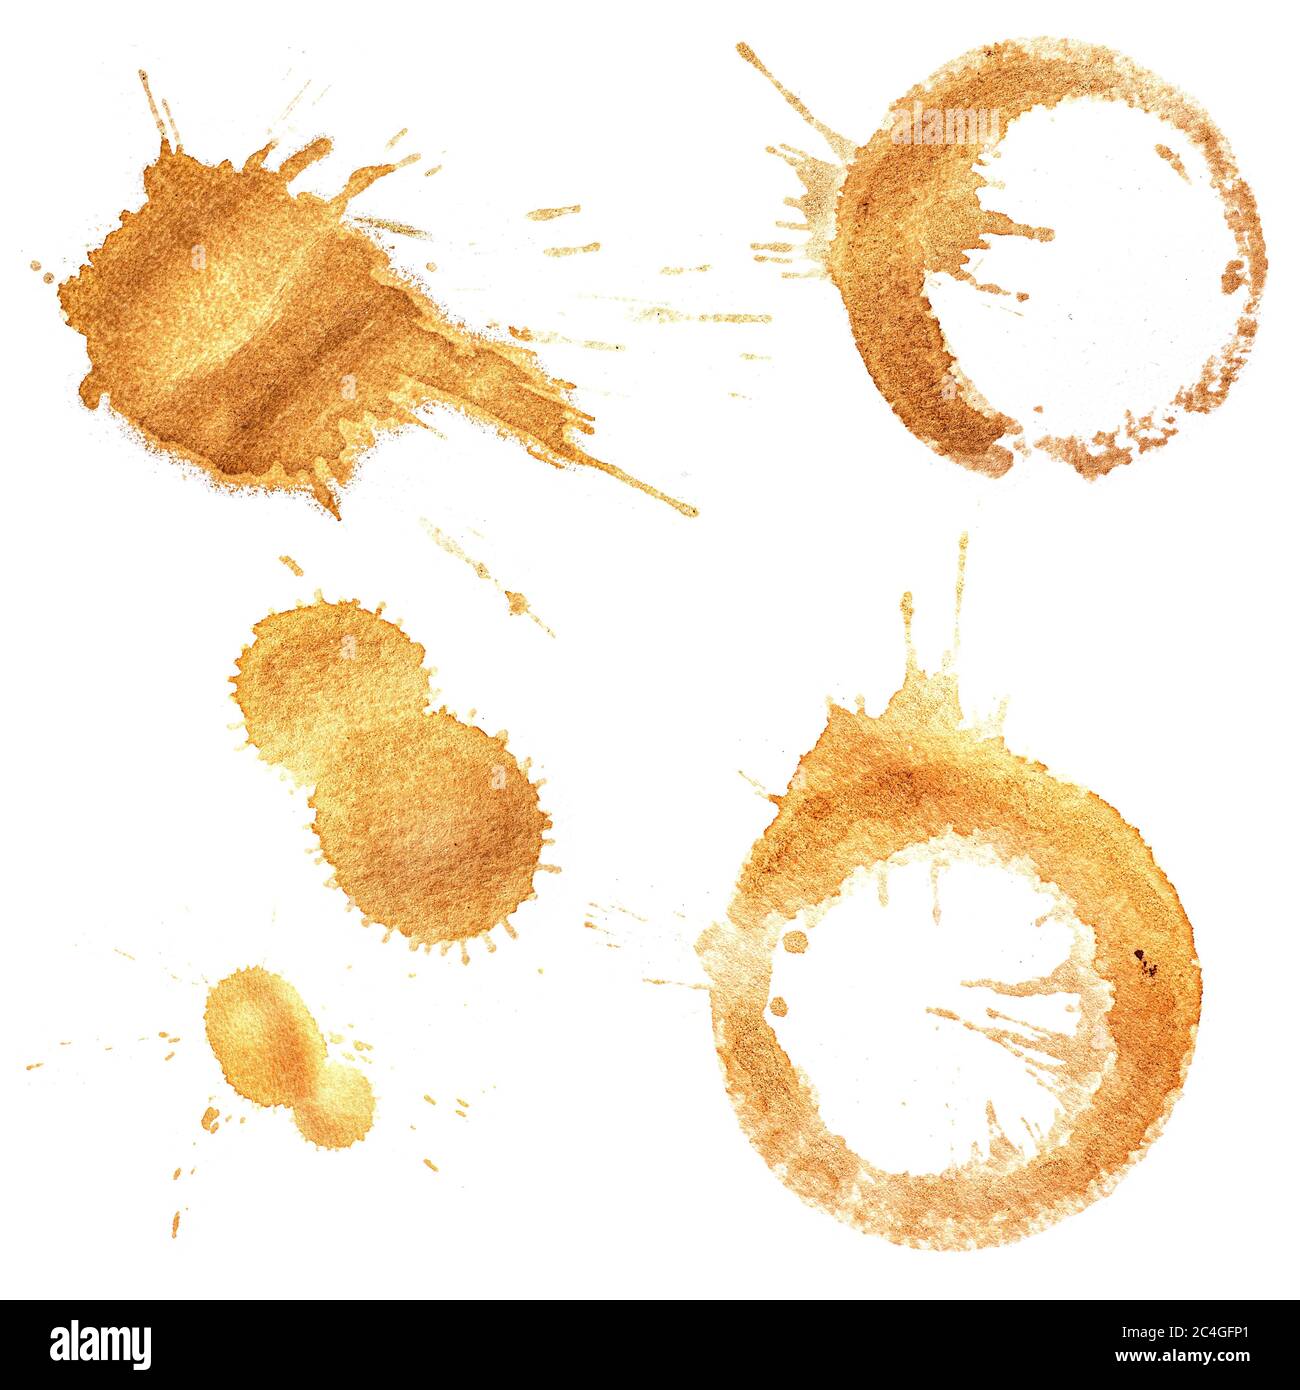 Coffee stains and splatters design pack on white background Stock Photo